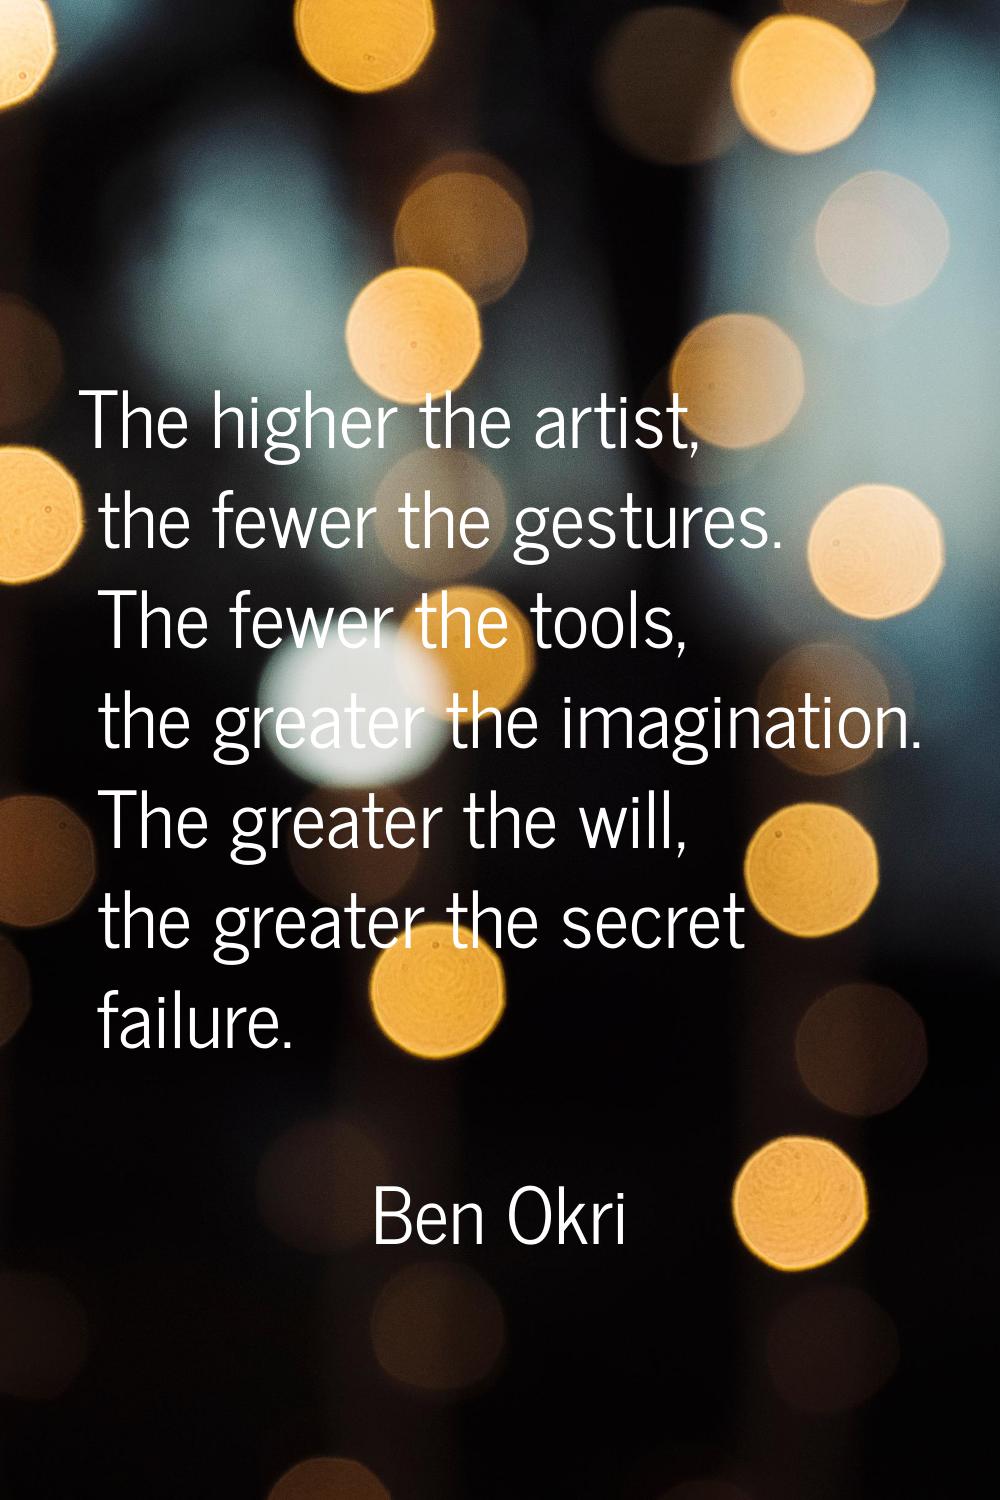 The higher the artist, the fewer the gestures. The fewer the tools, the greater the imagination. Th